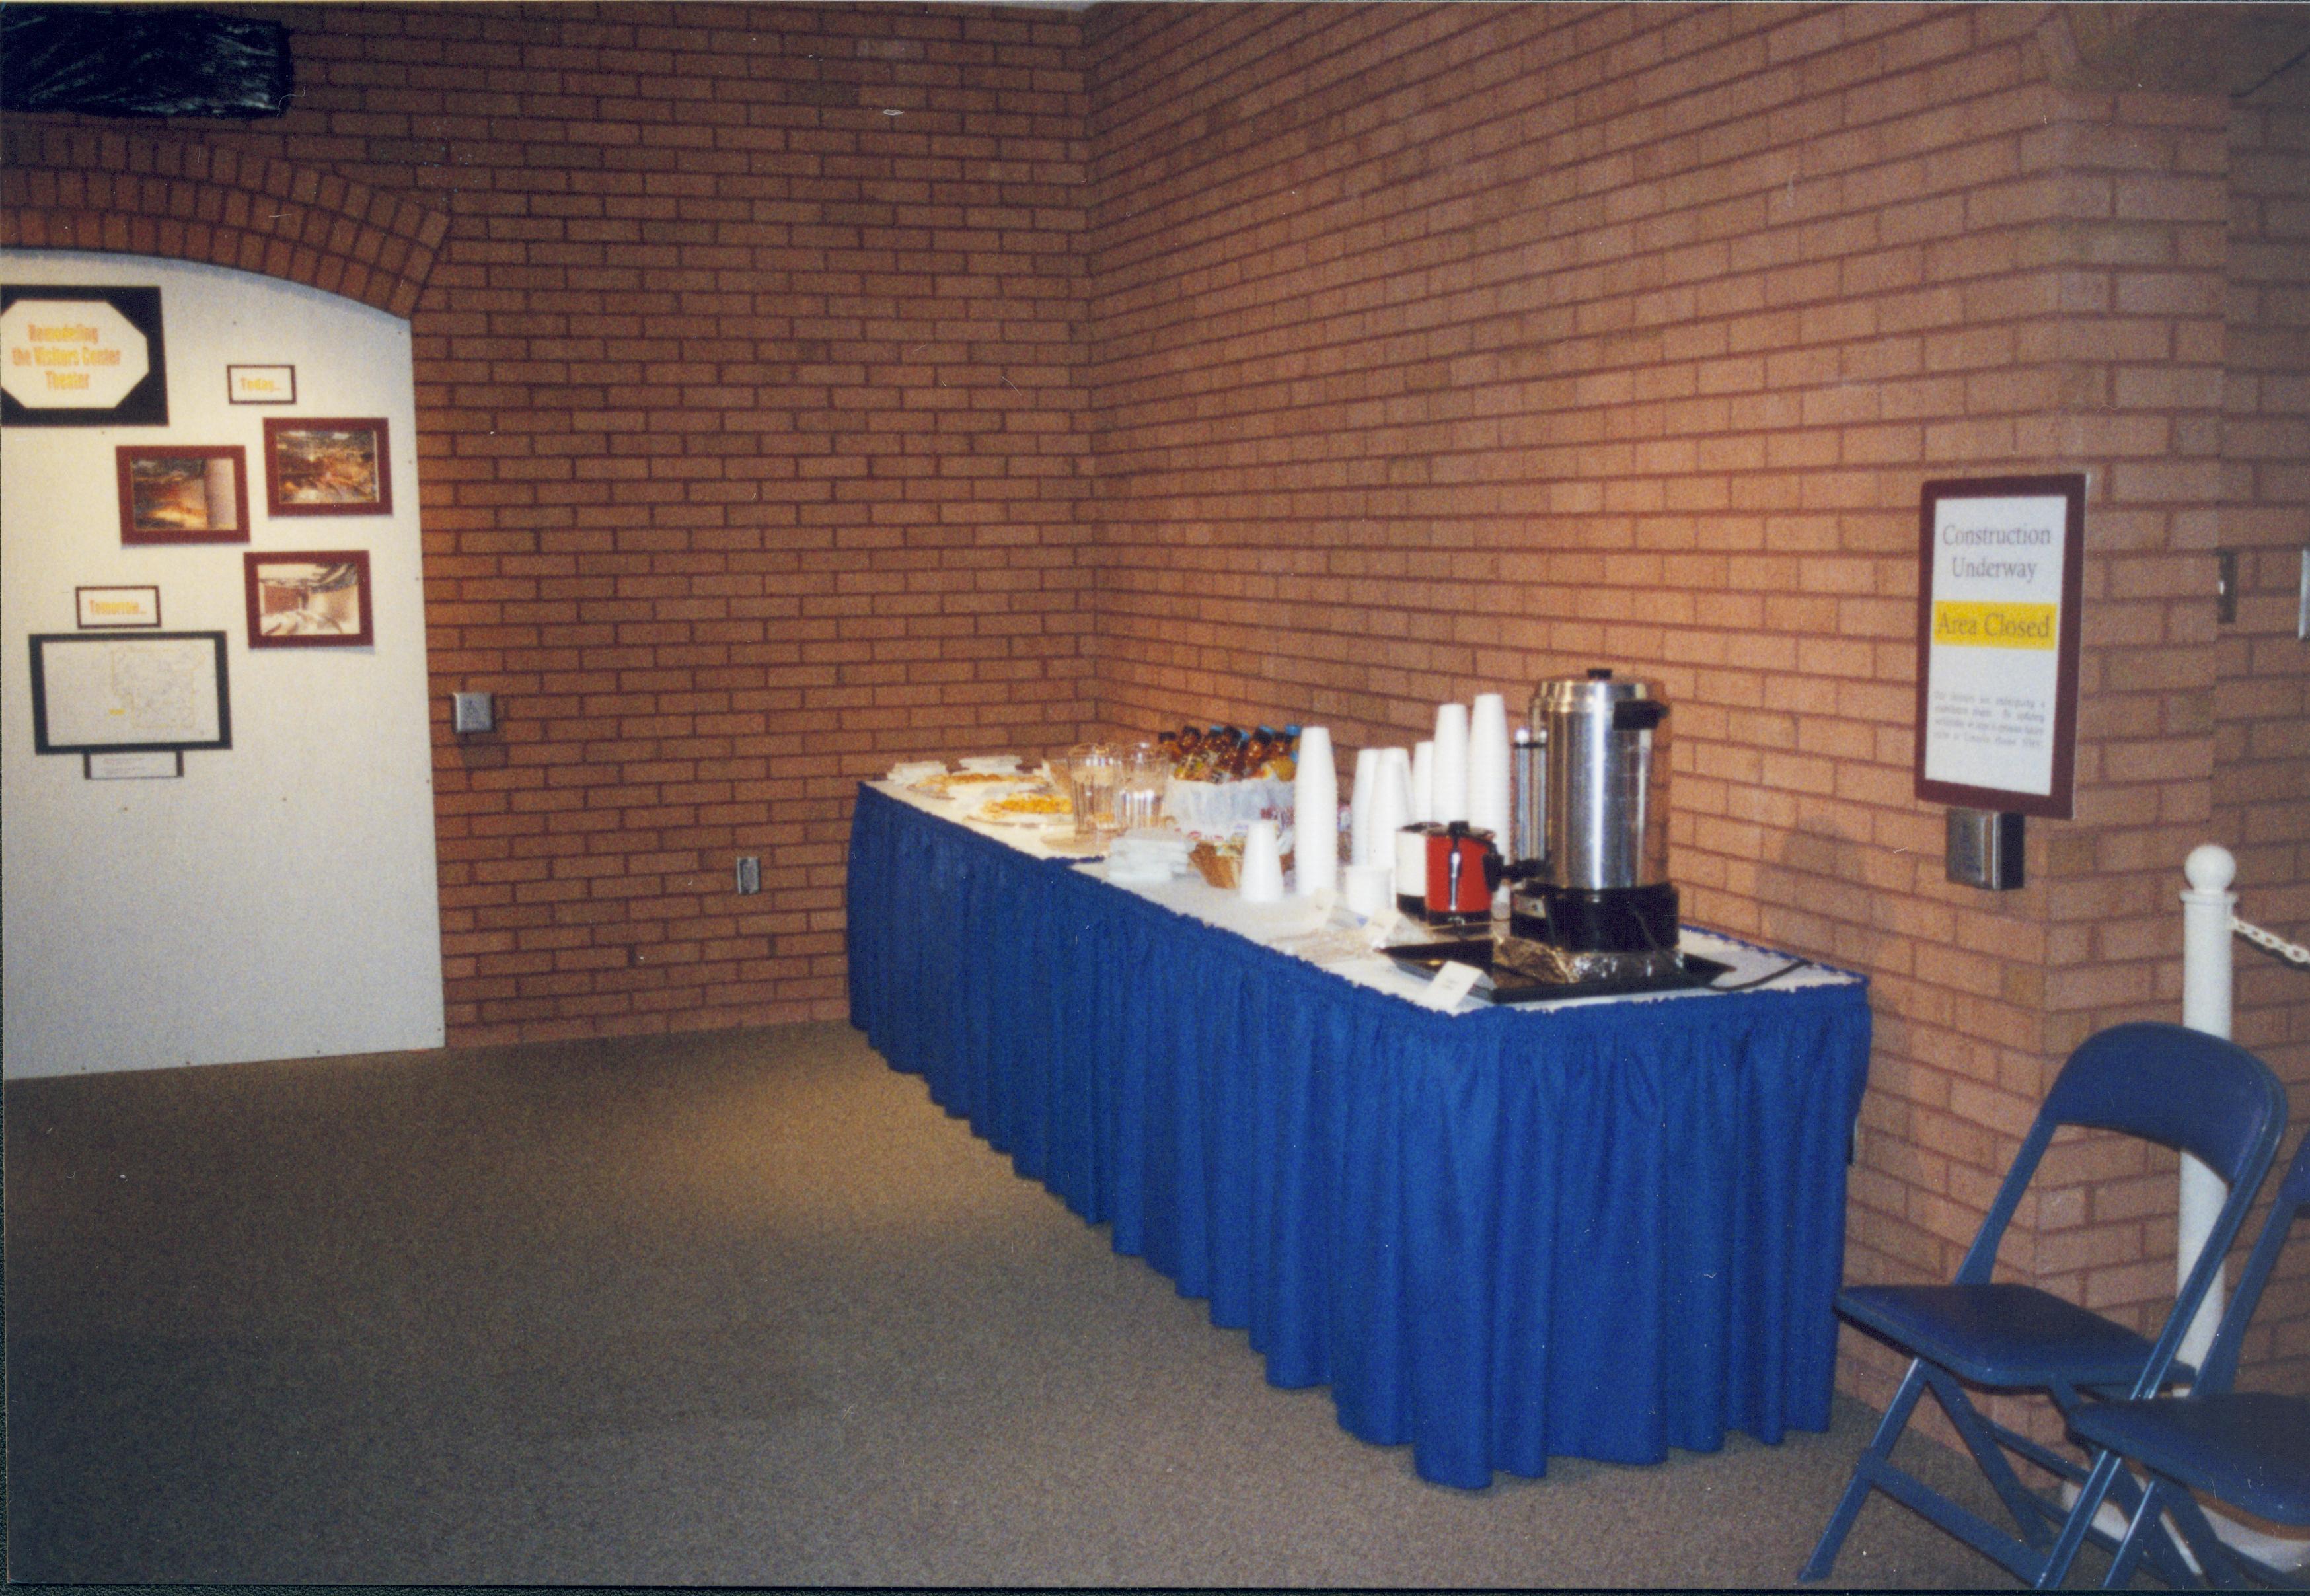 refreshment table Lincoln Home NHS- Lincoln Birthday, George Painter Lectures, Roll 2001-1 exp 14 refreshments, reception